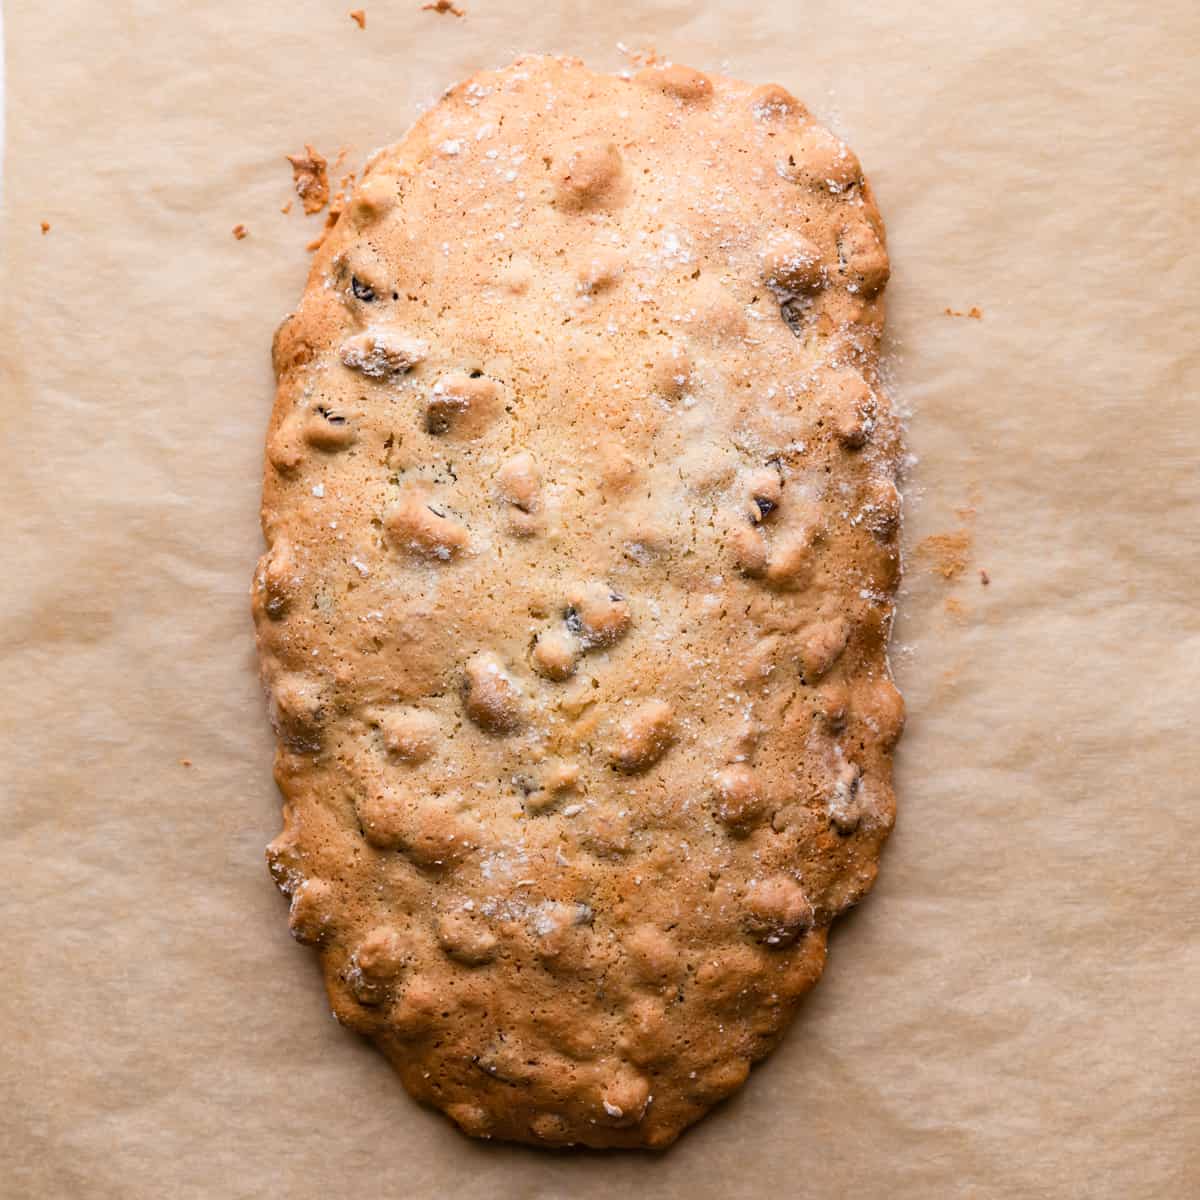 pale brown biscotti dough after being baked once.